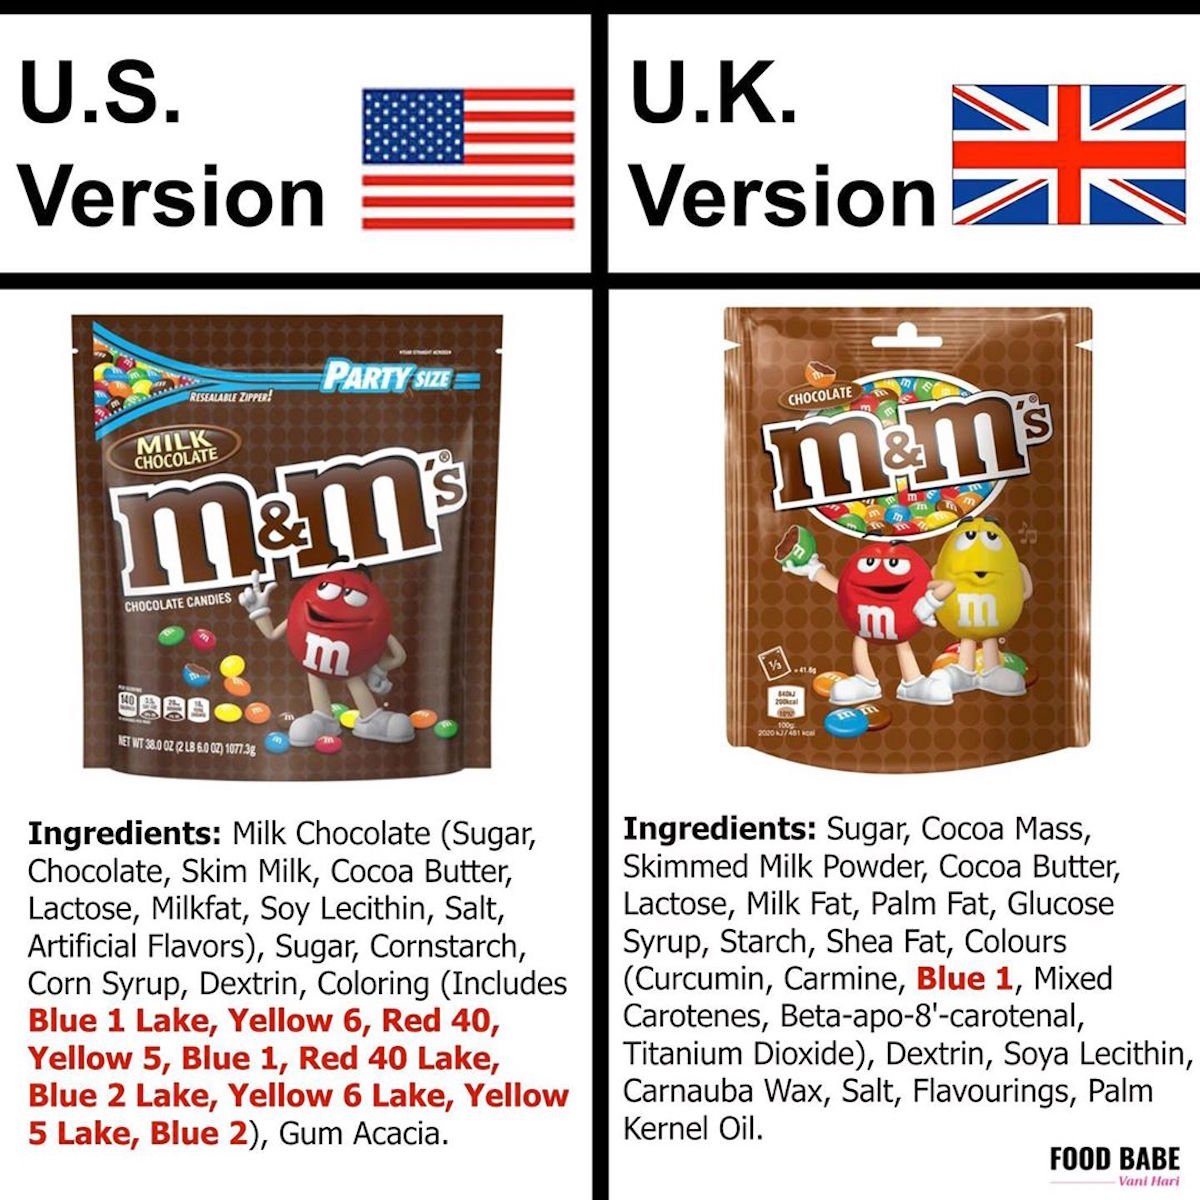 Why are M&M's in America made with artificial ingredients they don